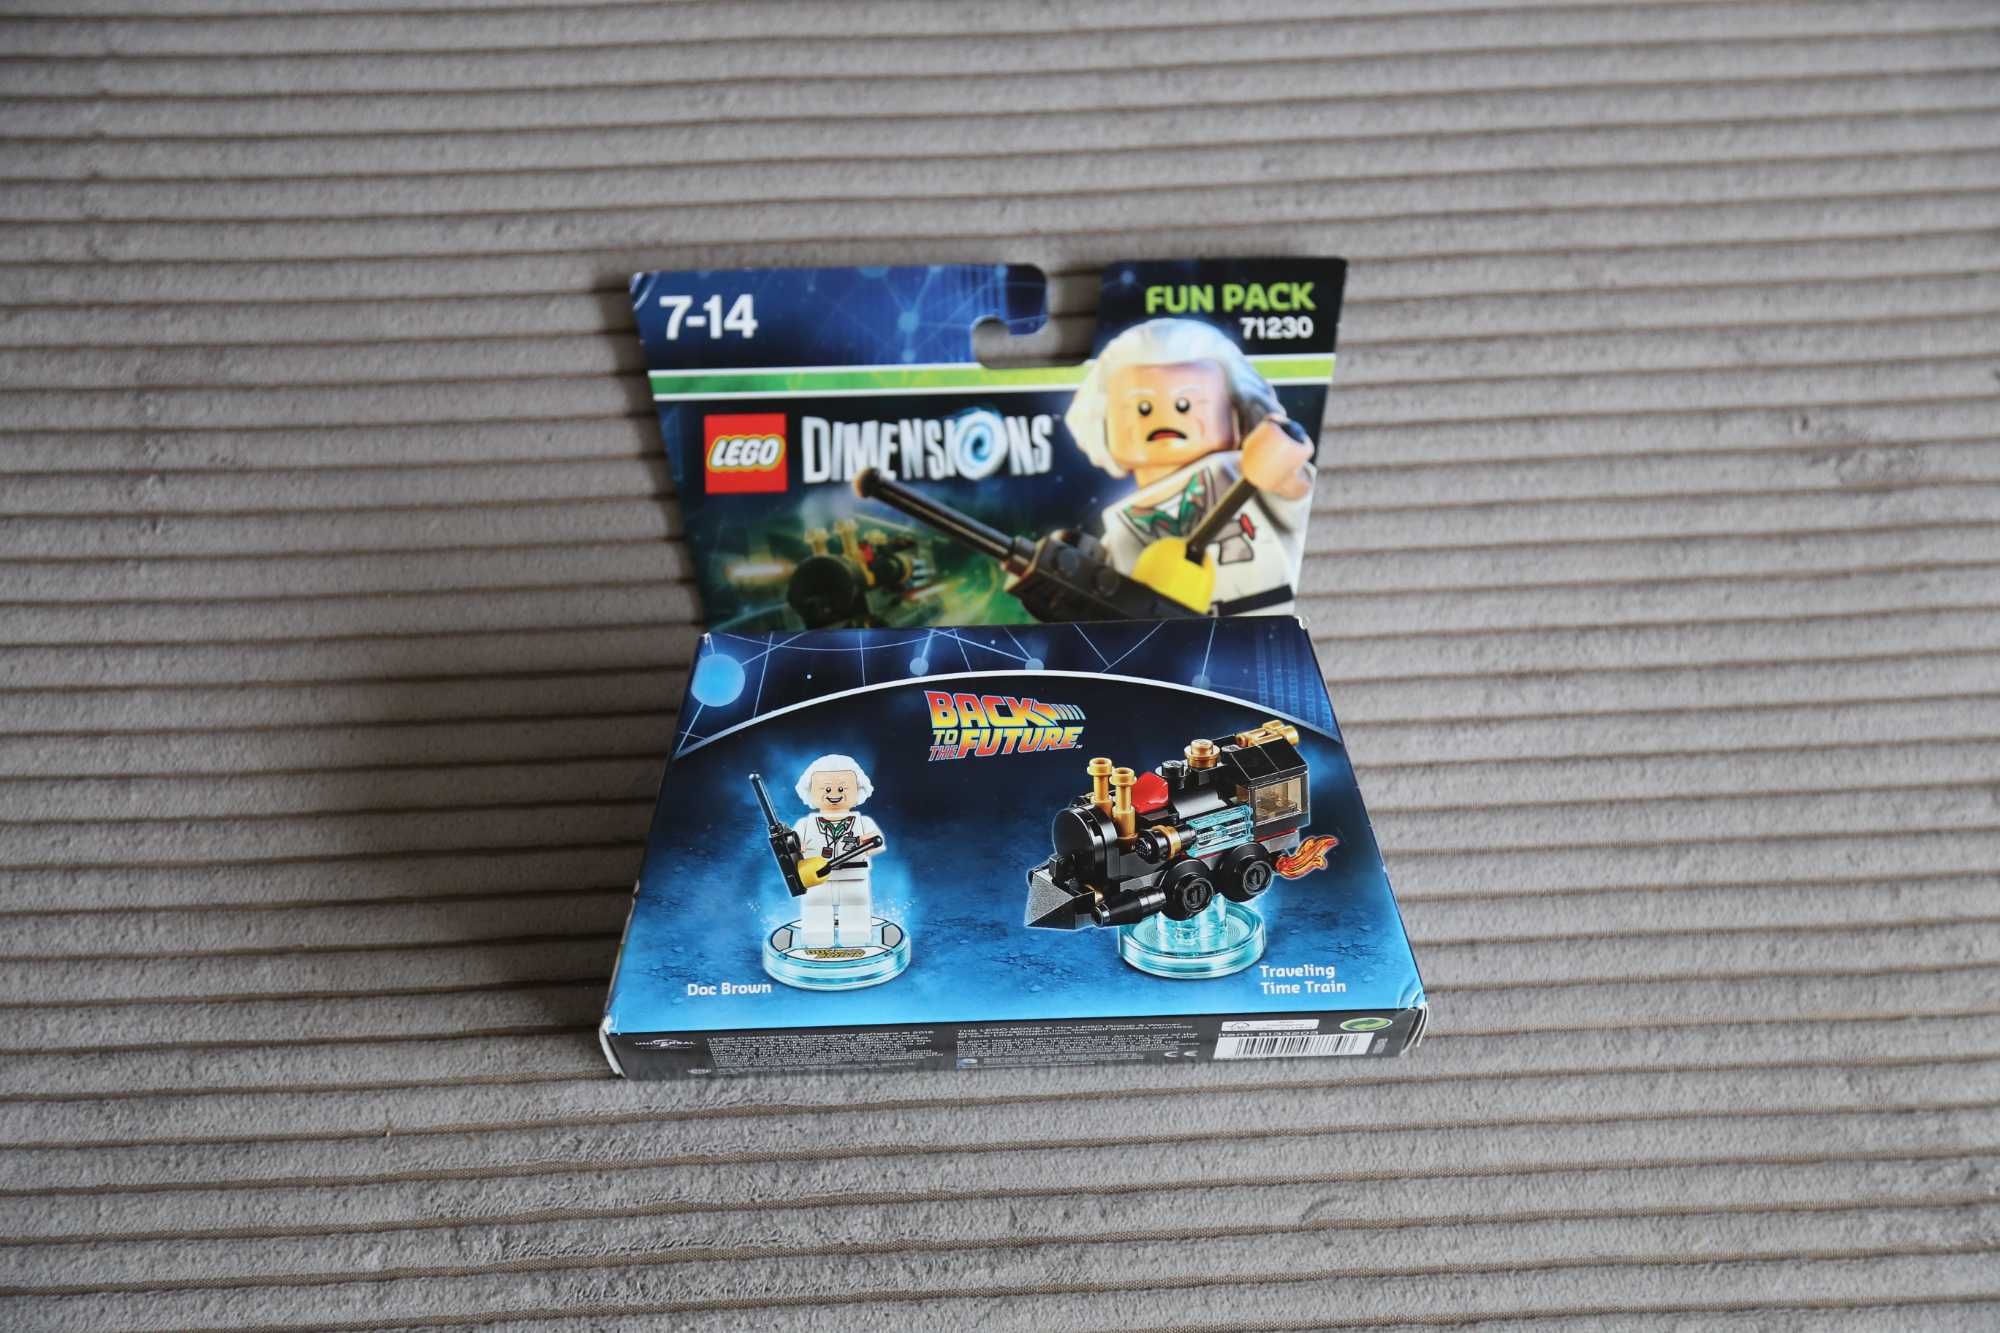 LEGO 71230 Dimensions Back to the future fun pack